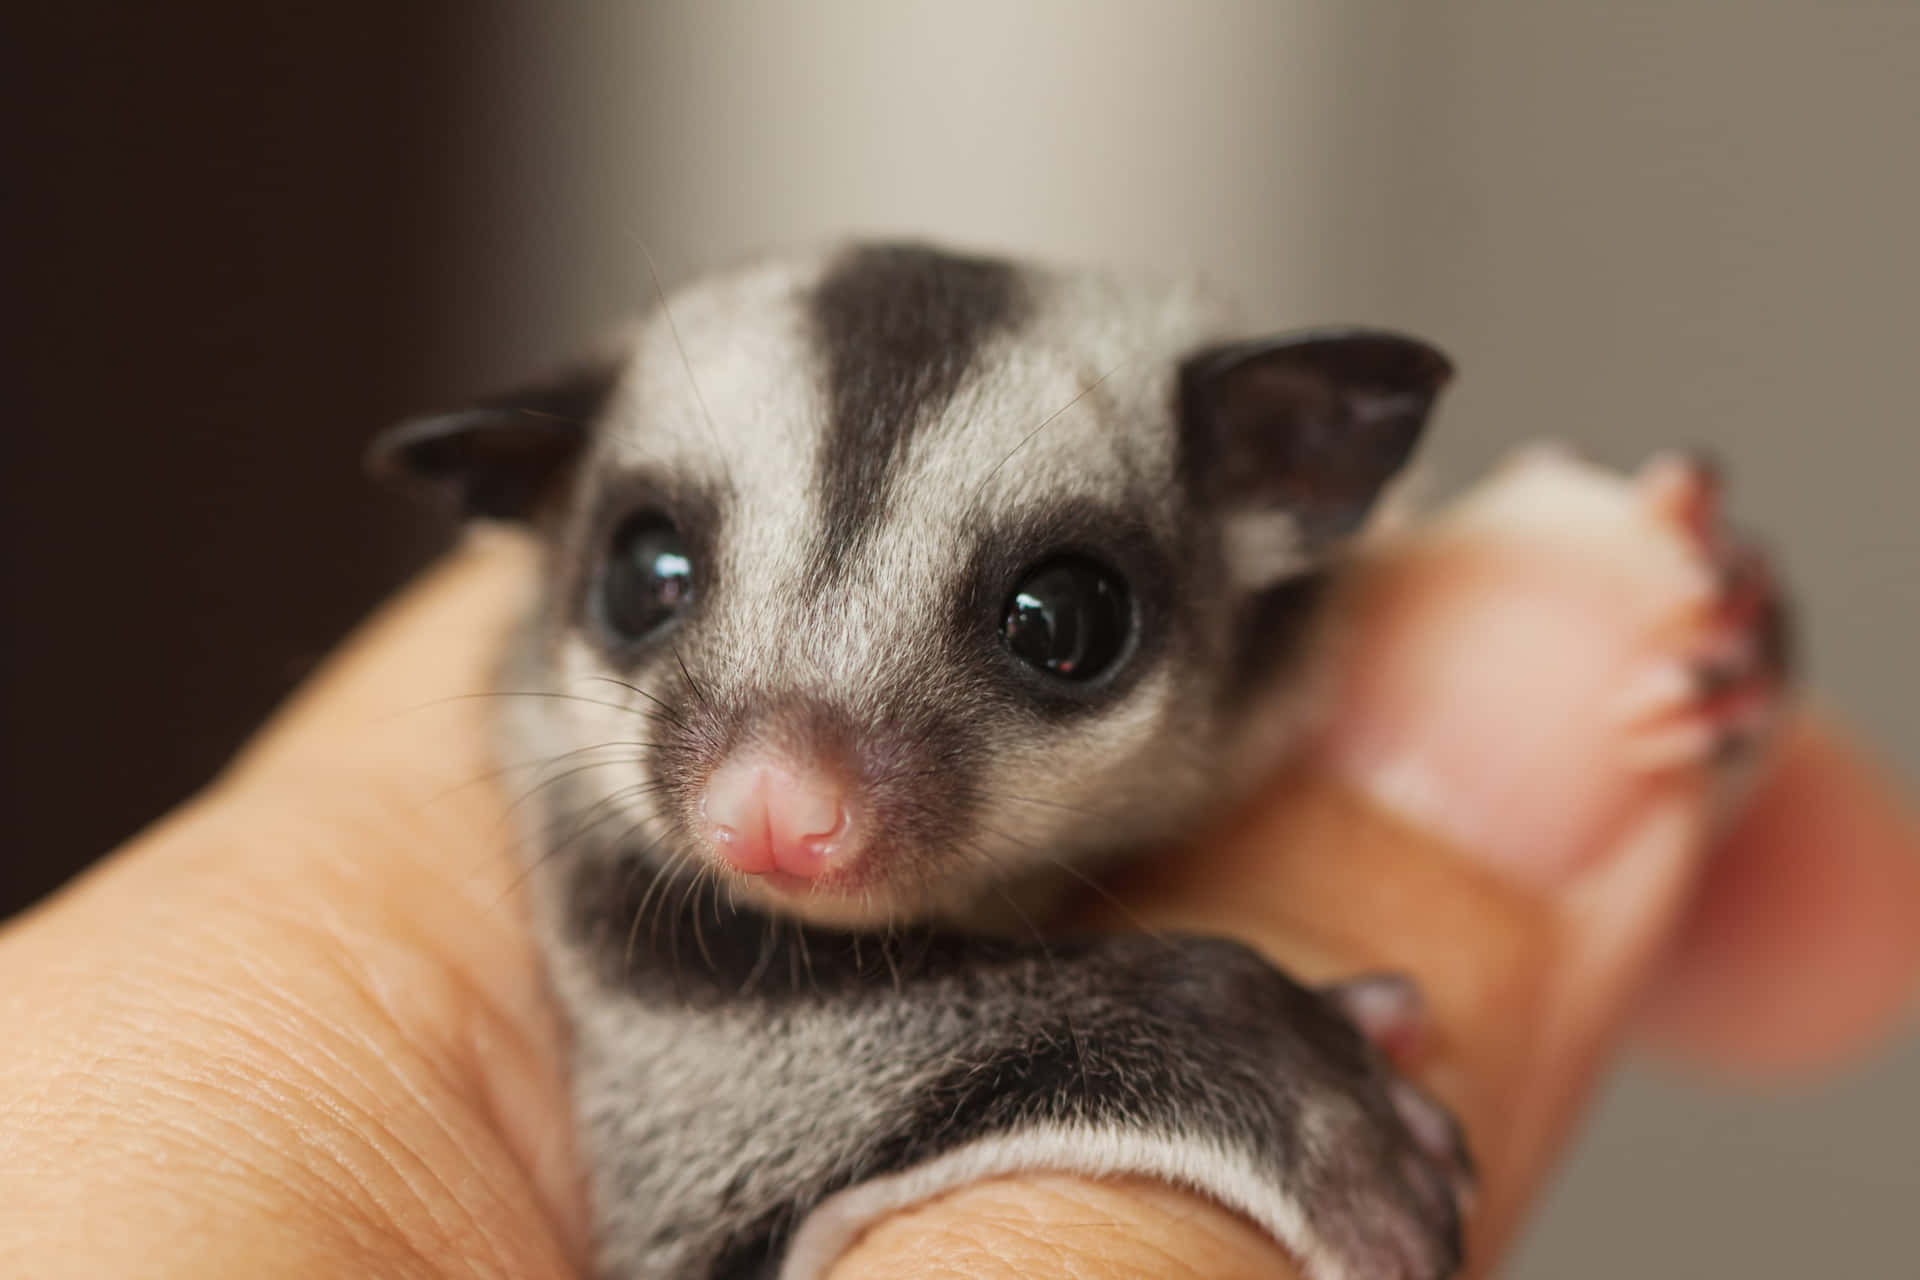 A playful and curious Sugar Glider